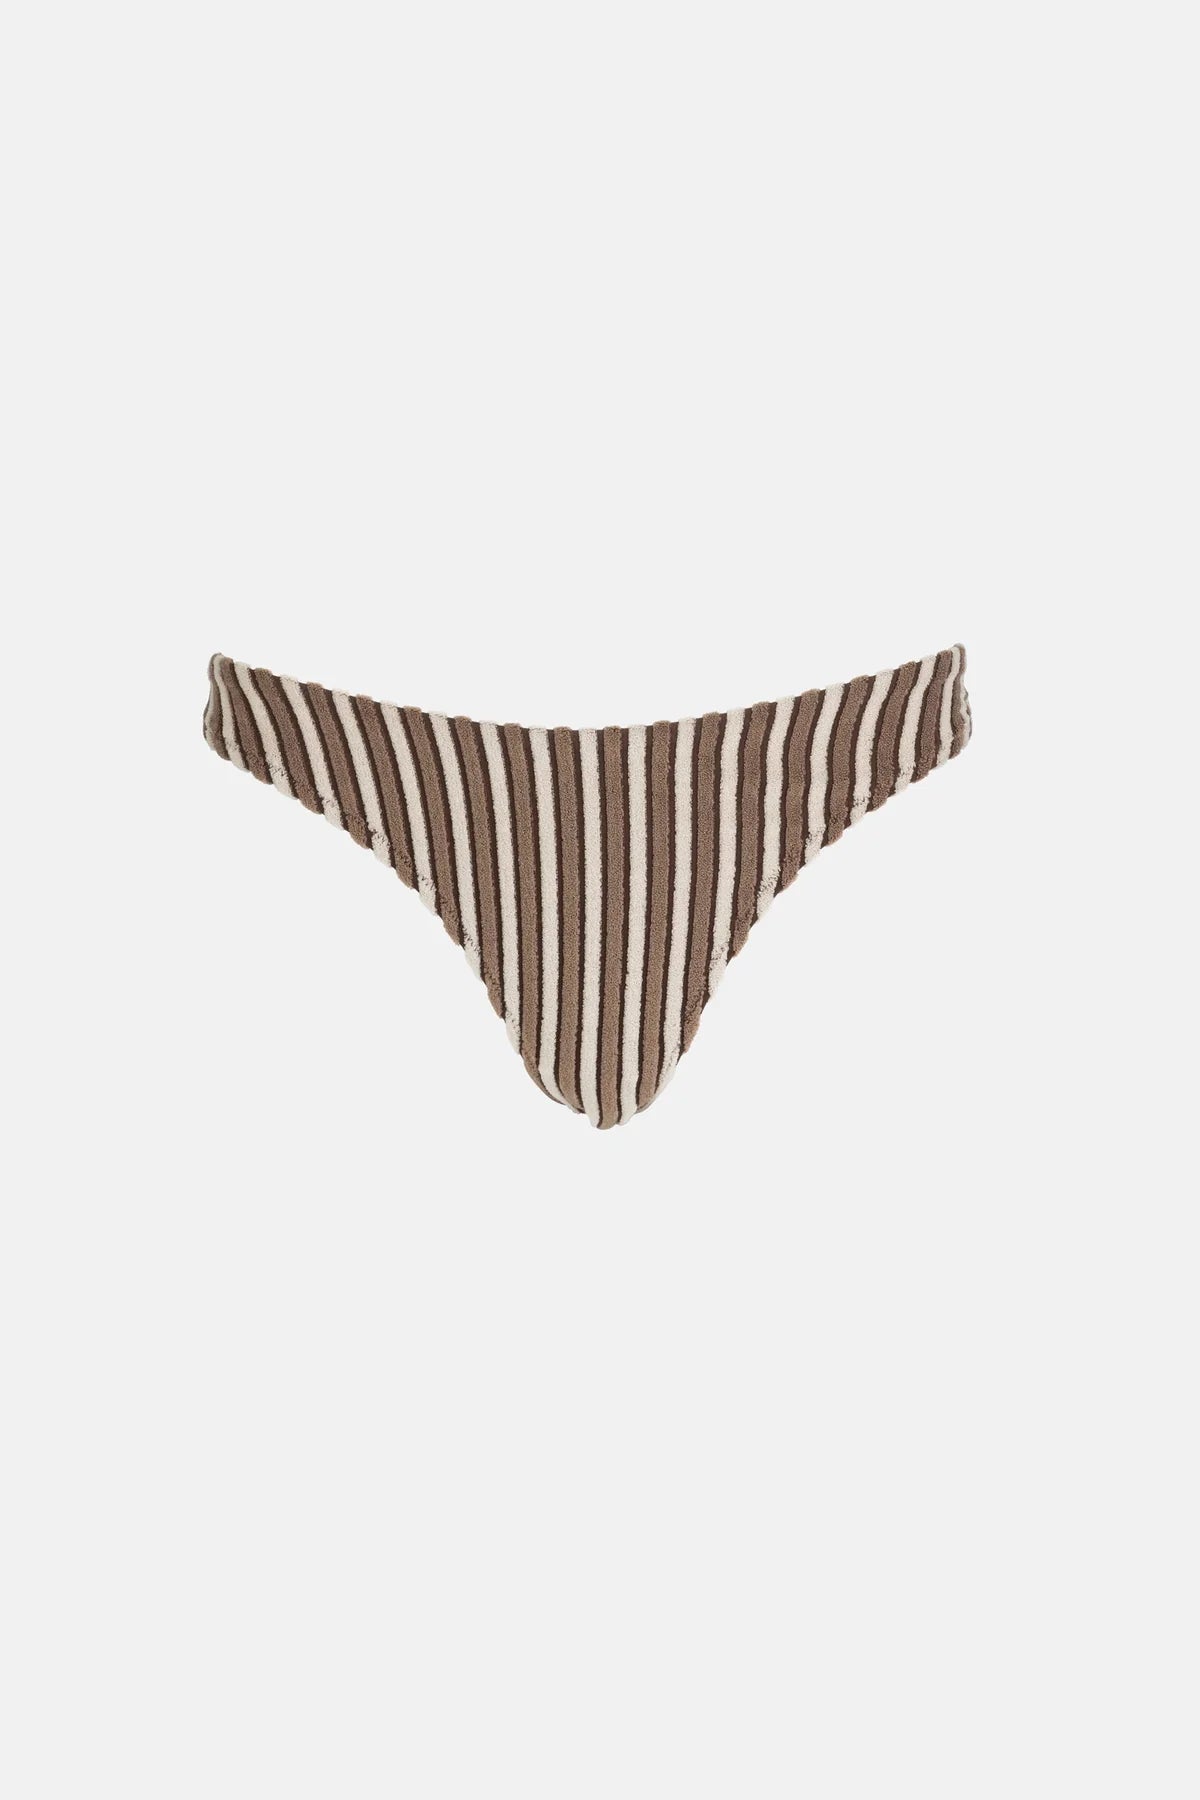 Terry Sands Stripe Hi Cut Pant Cocoa | Collective Request 